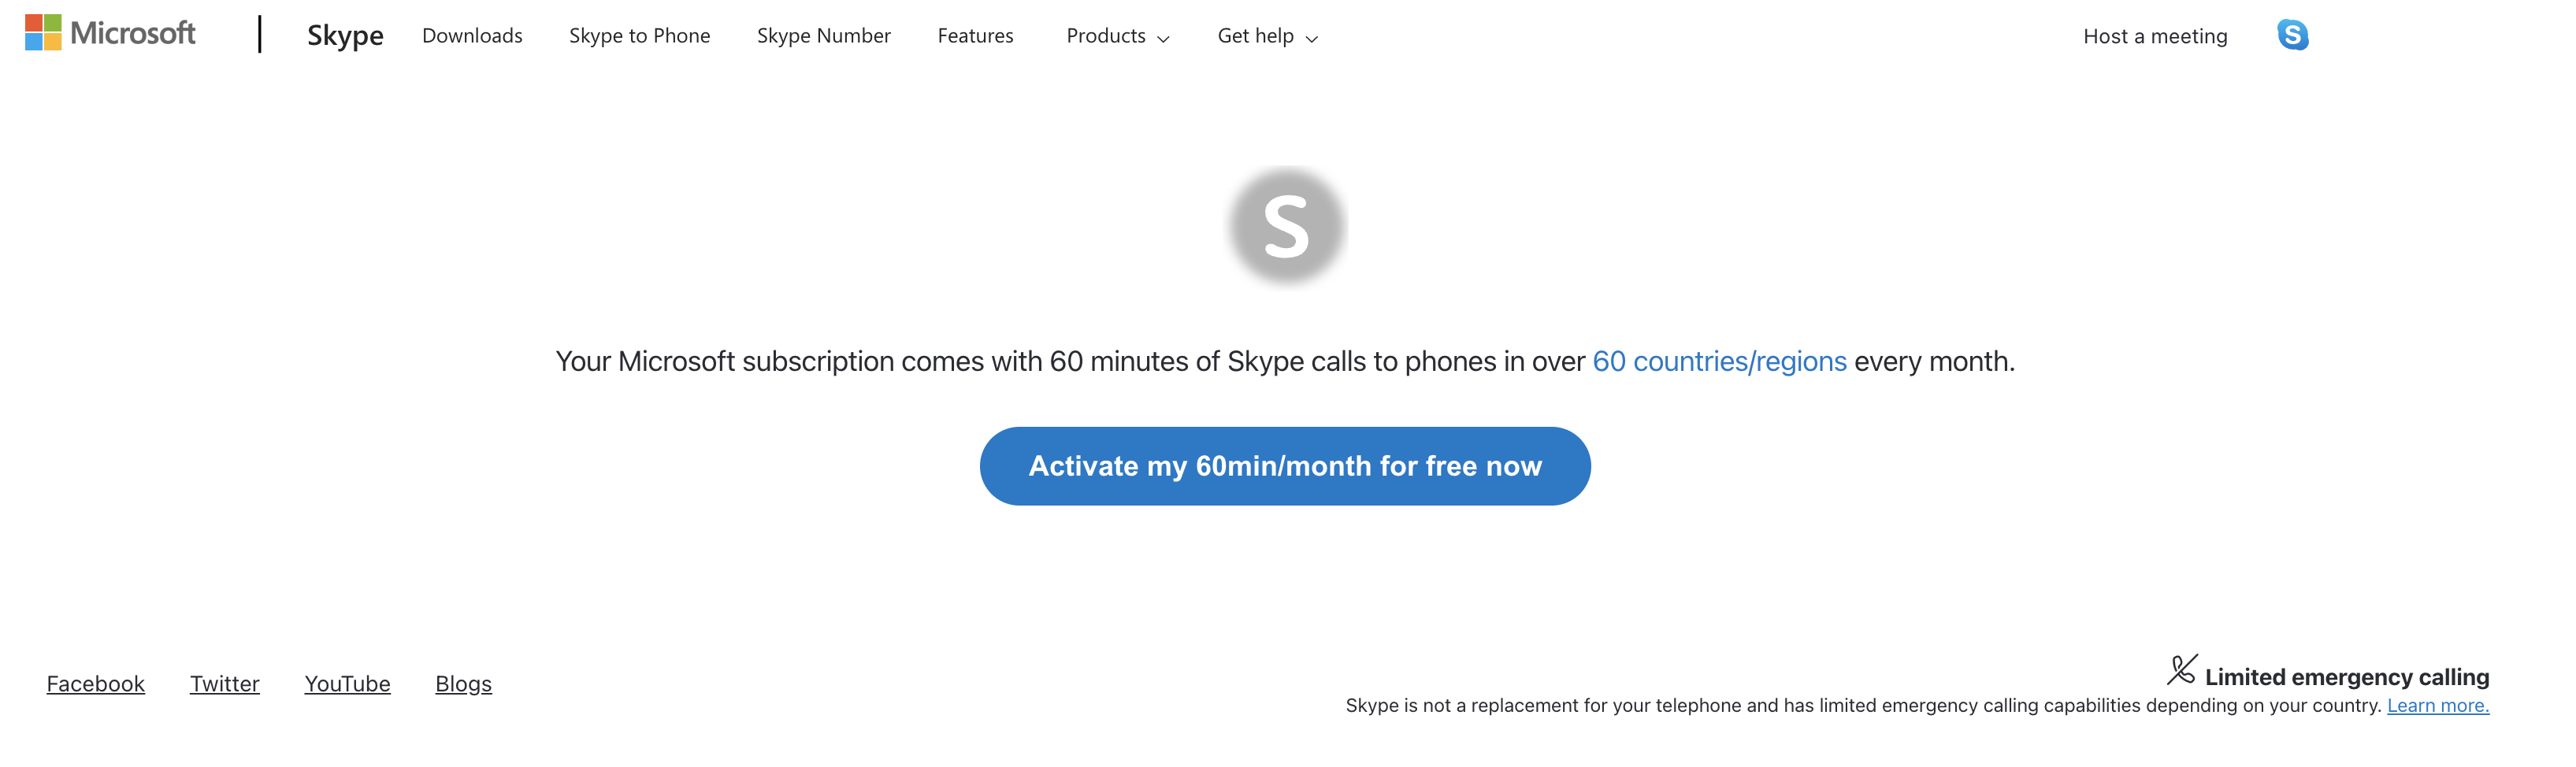 How do I activate my Microsoft 365 Skype minutes? | Skype Support